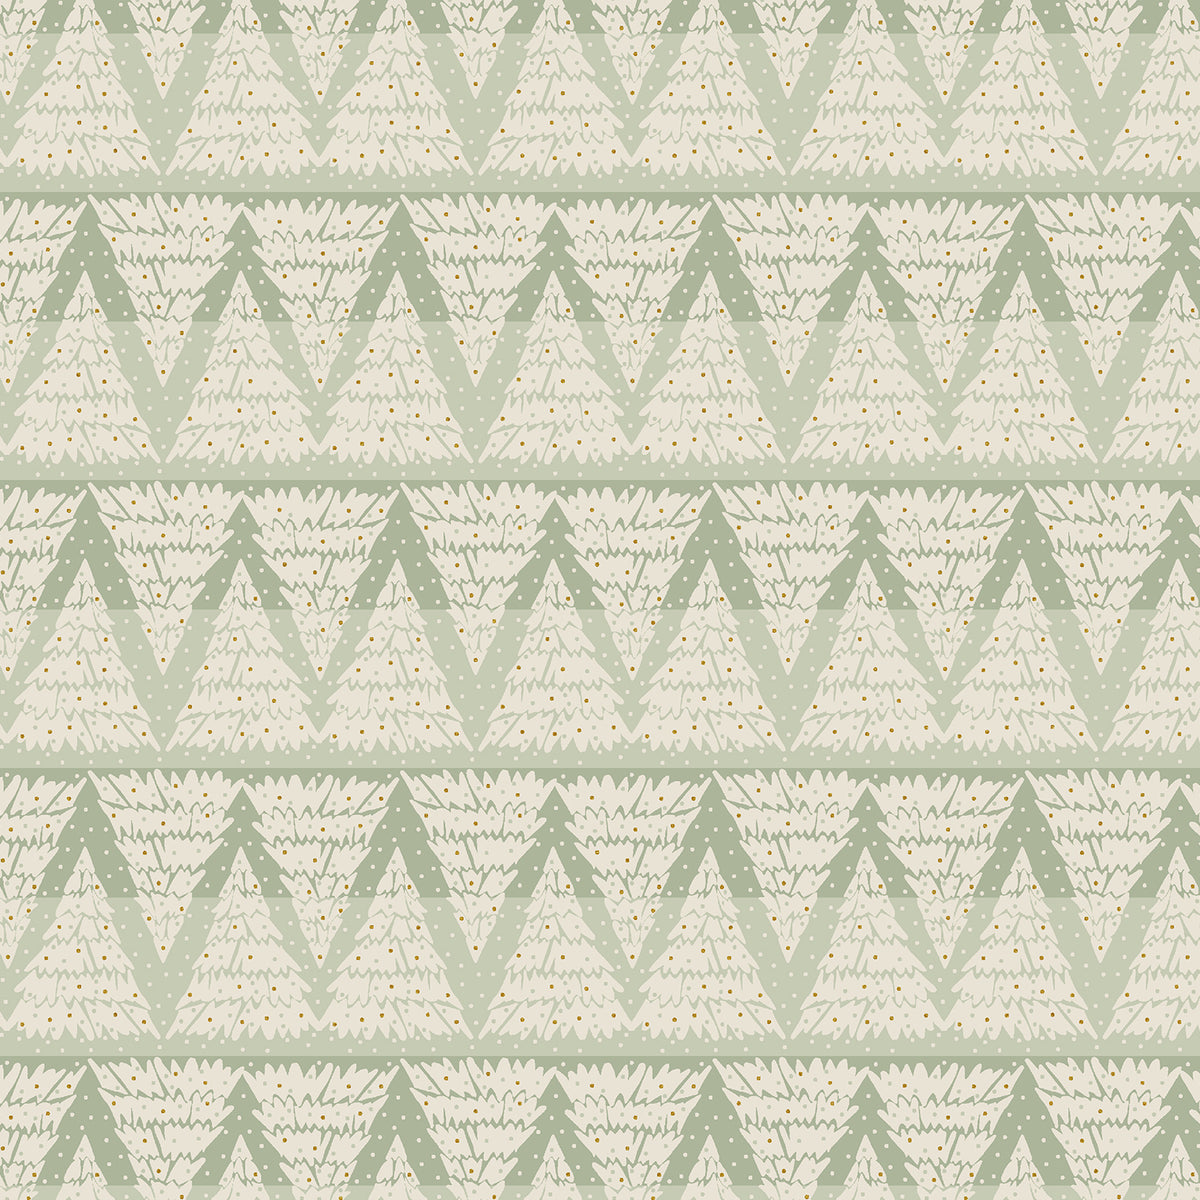 Tinsel on the Trail Quilt Fabric by Cotton+Steel - Tree Hunt in Hemlock (Light Green) - AC603-HE1M